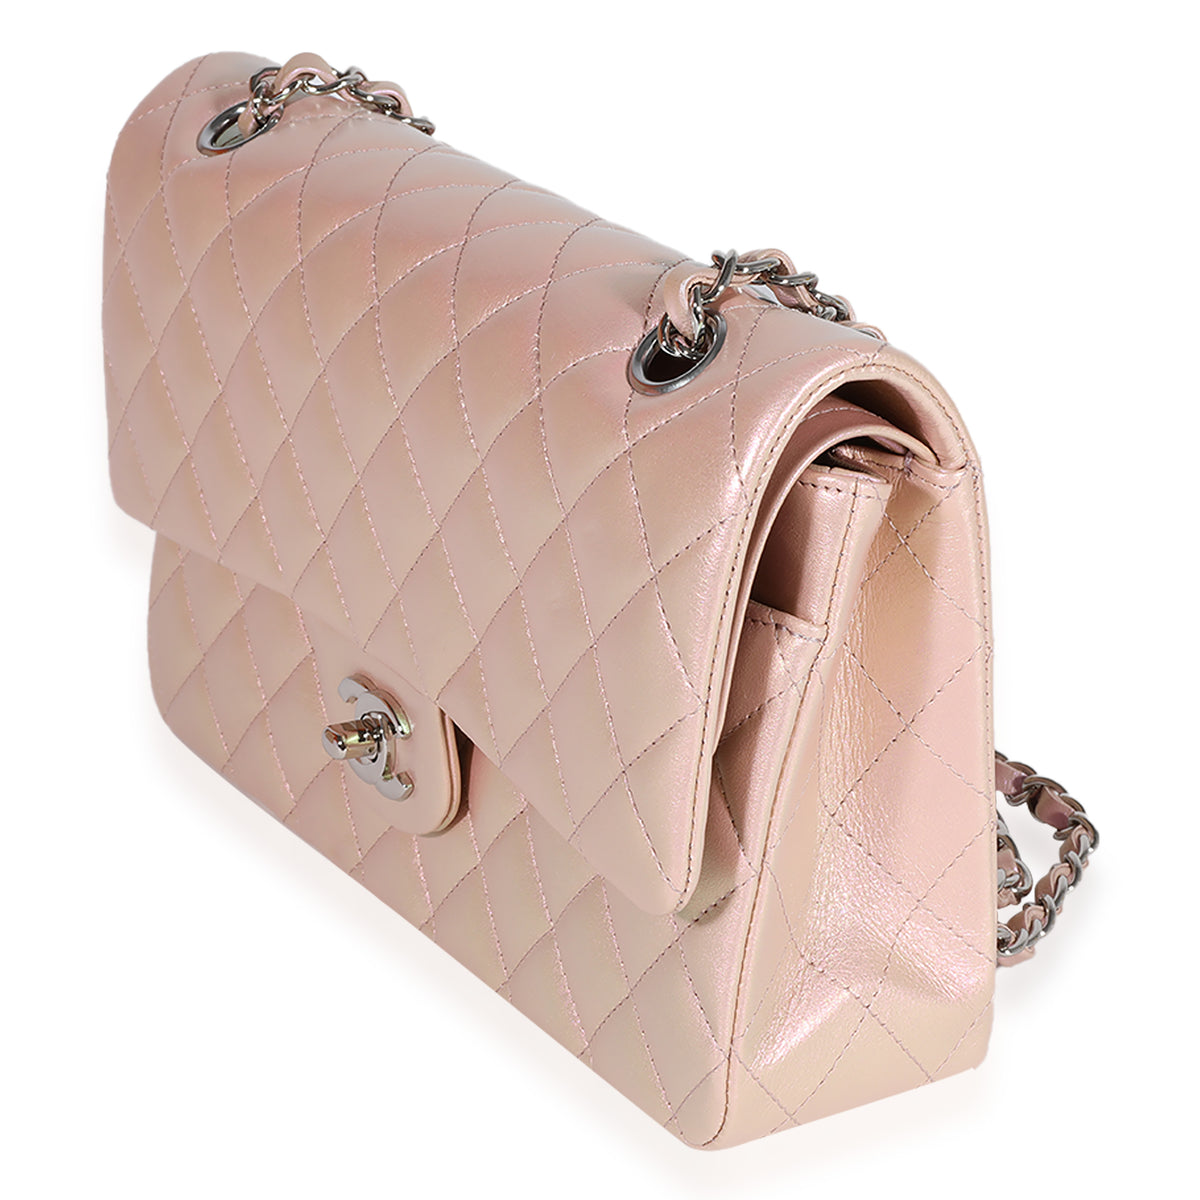 Iridescent Pink Quilted Lambskin Medium Classic Double Flap Silver  Hardware, 2021